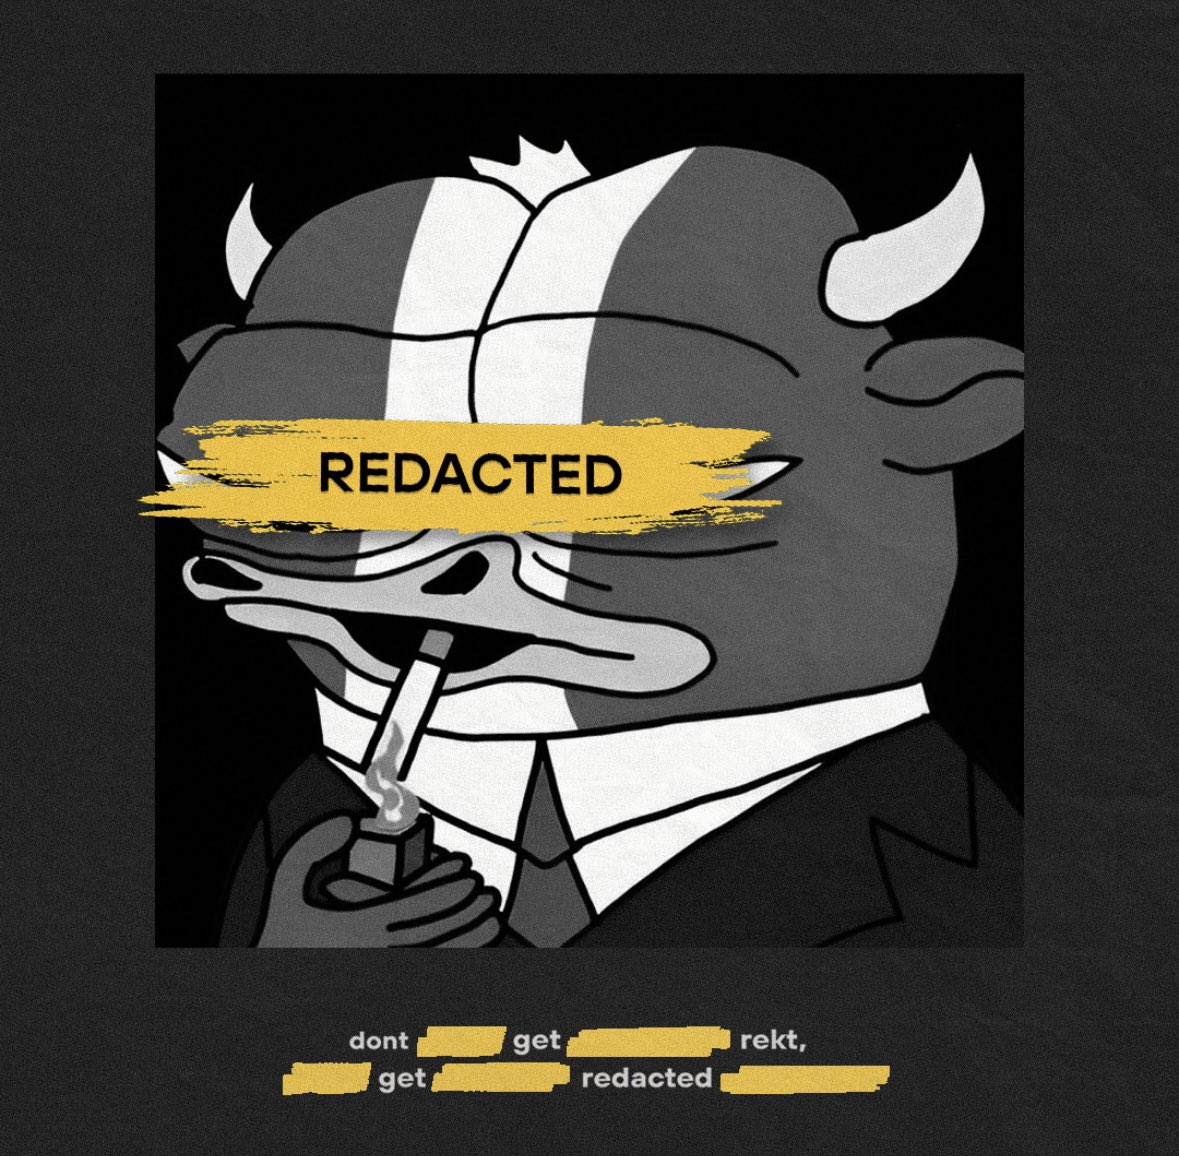 Happy to announce that I have invested in ███████ powered by @redactedcoin. Very excited for what they have cooking behind the curtains. Who else tryna get some redacted?